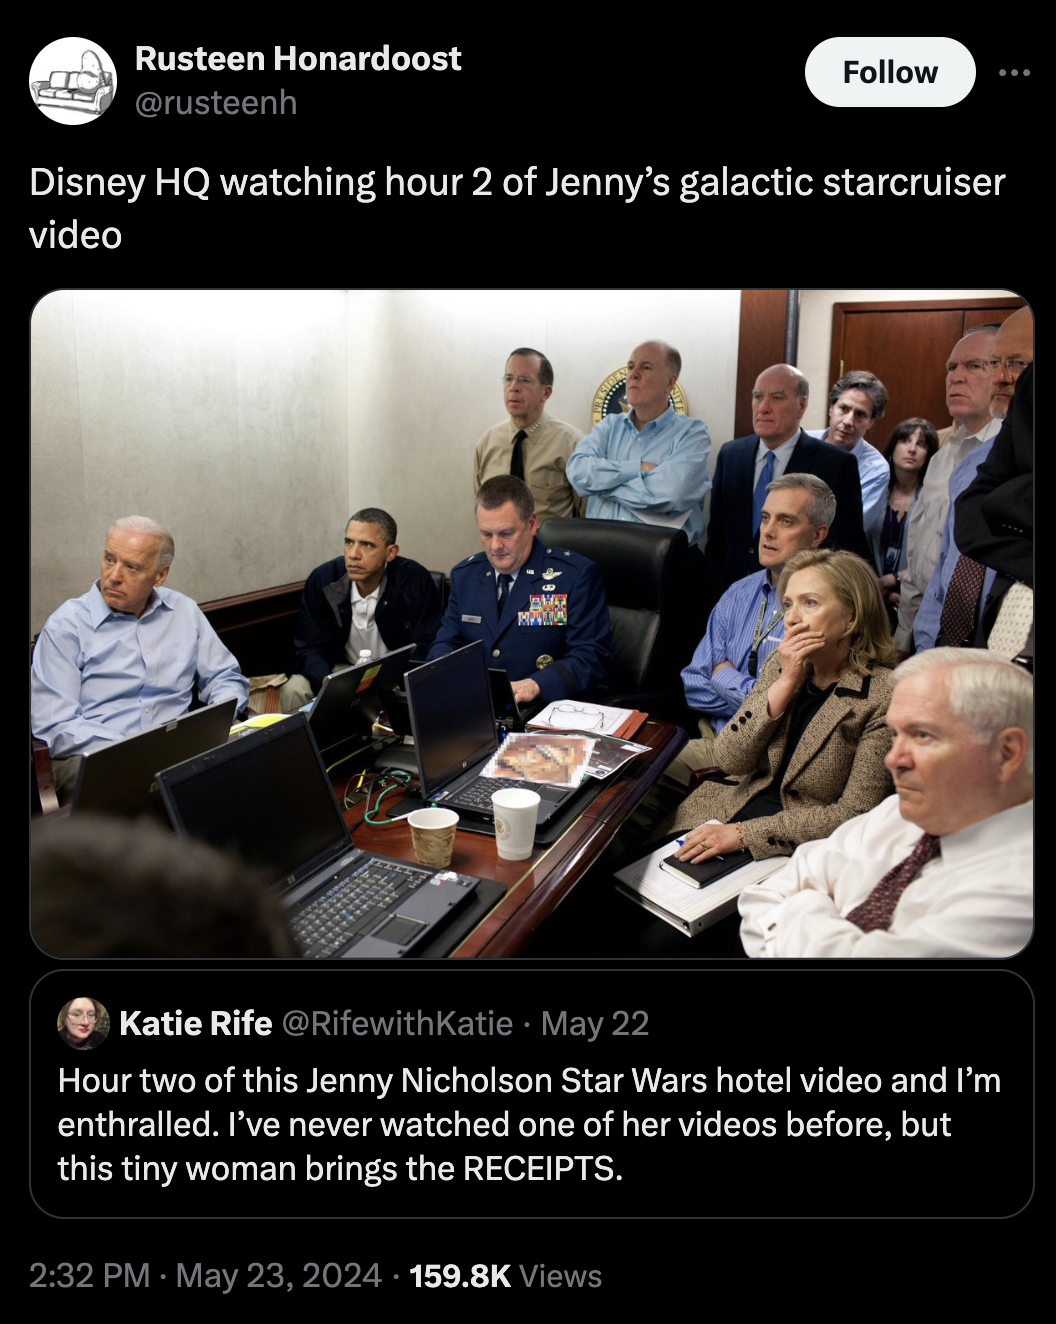 water temple obama meme - Rusteen Honardoost Disney Hq watching hour 2 of Jenny's galactic starcruiser video Katie Rife May 22 Hour two of this Jenny Nicholson Star Wars hotel video and I'm enthralled. I've never watched one of her videos before, but this